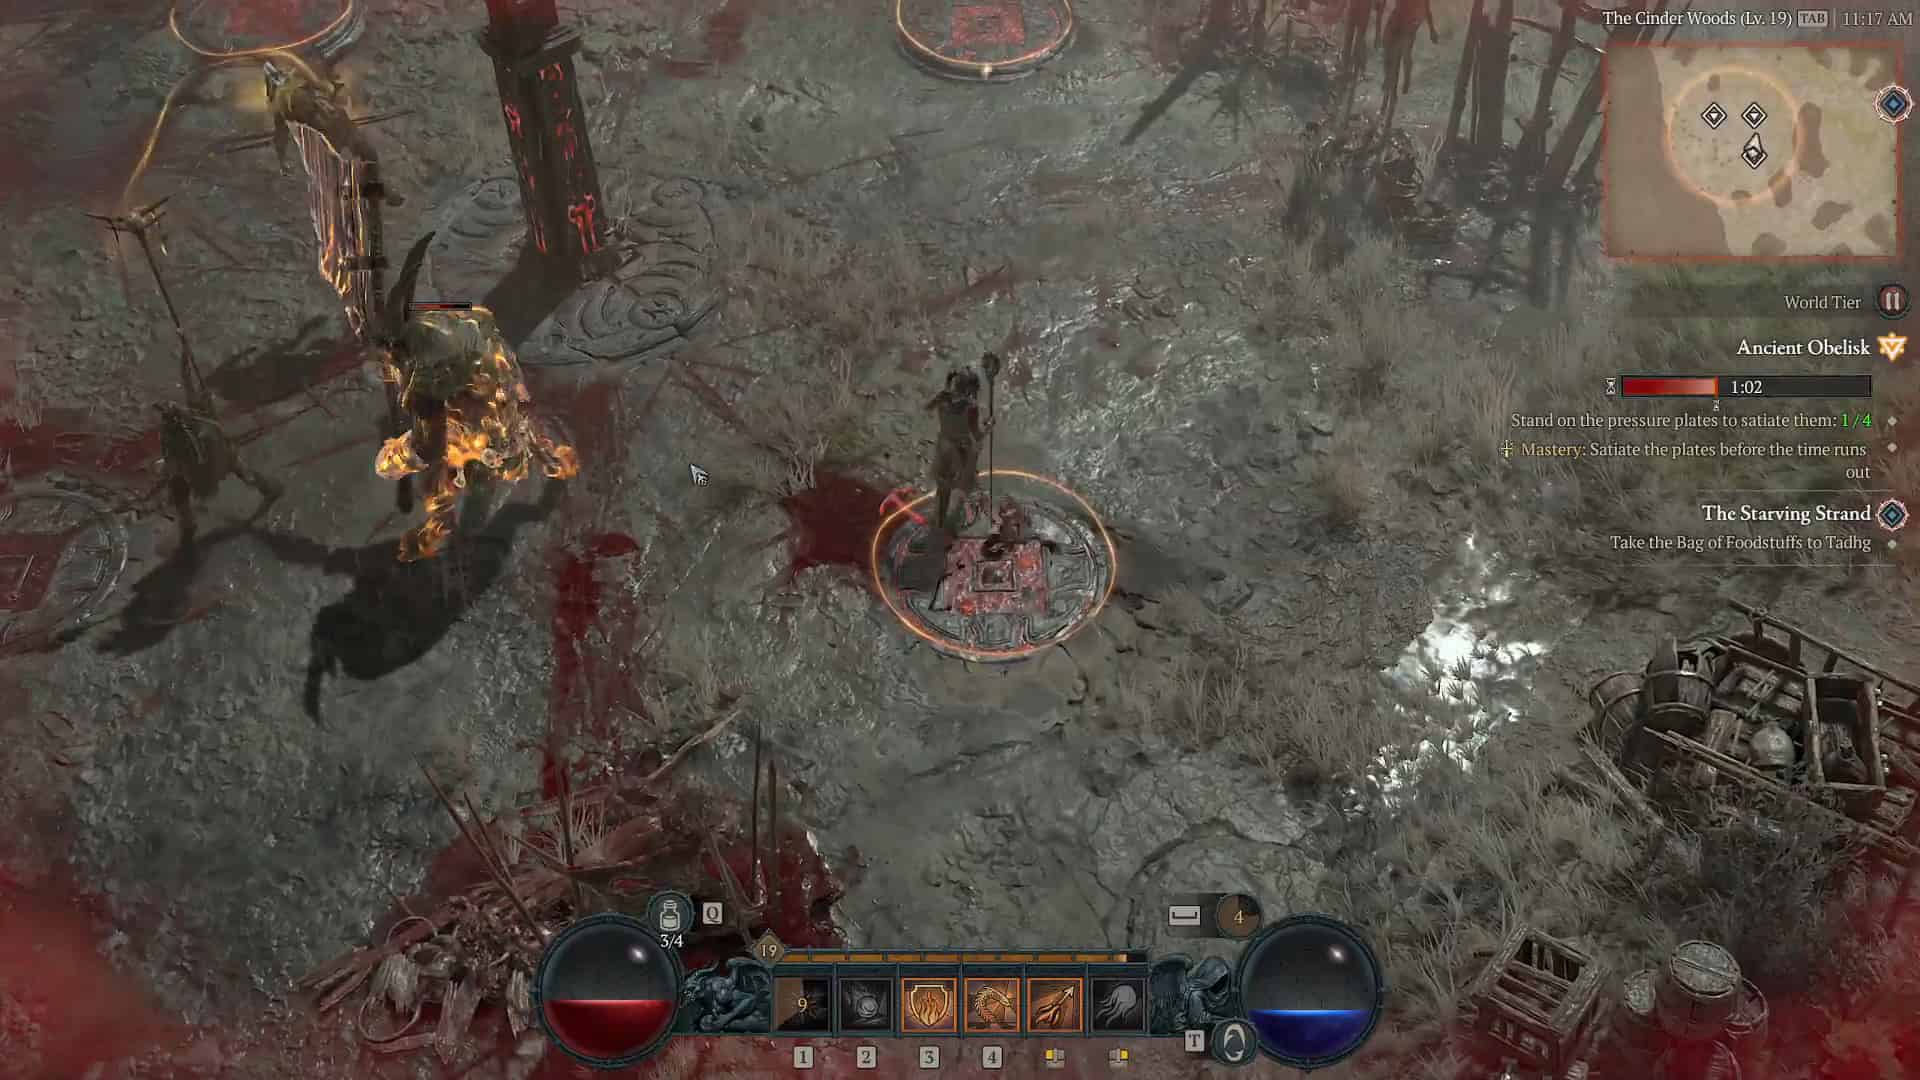 All Diablo 4 events in Season 1: An image of a player completing the Ancient Obelisk event in the game.